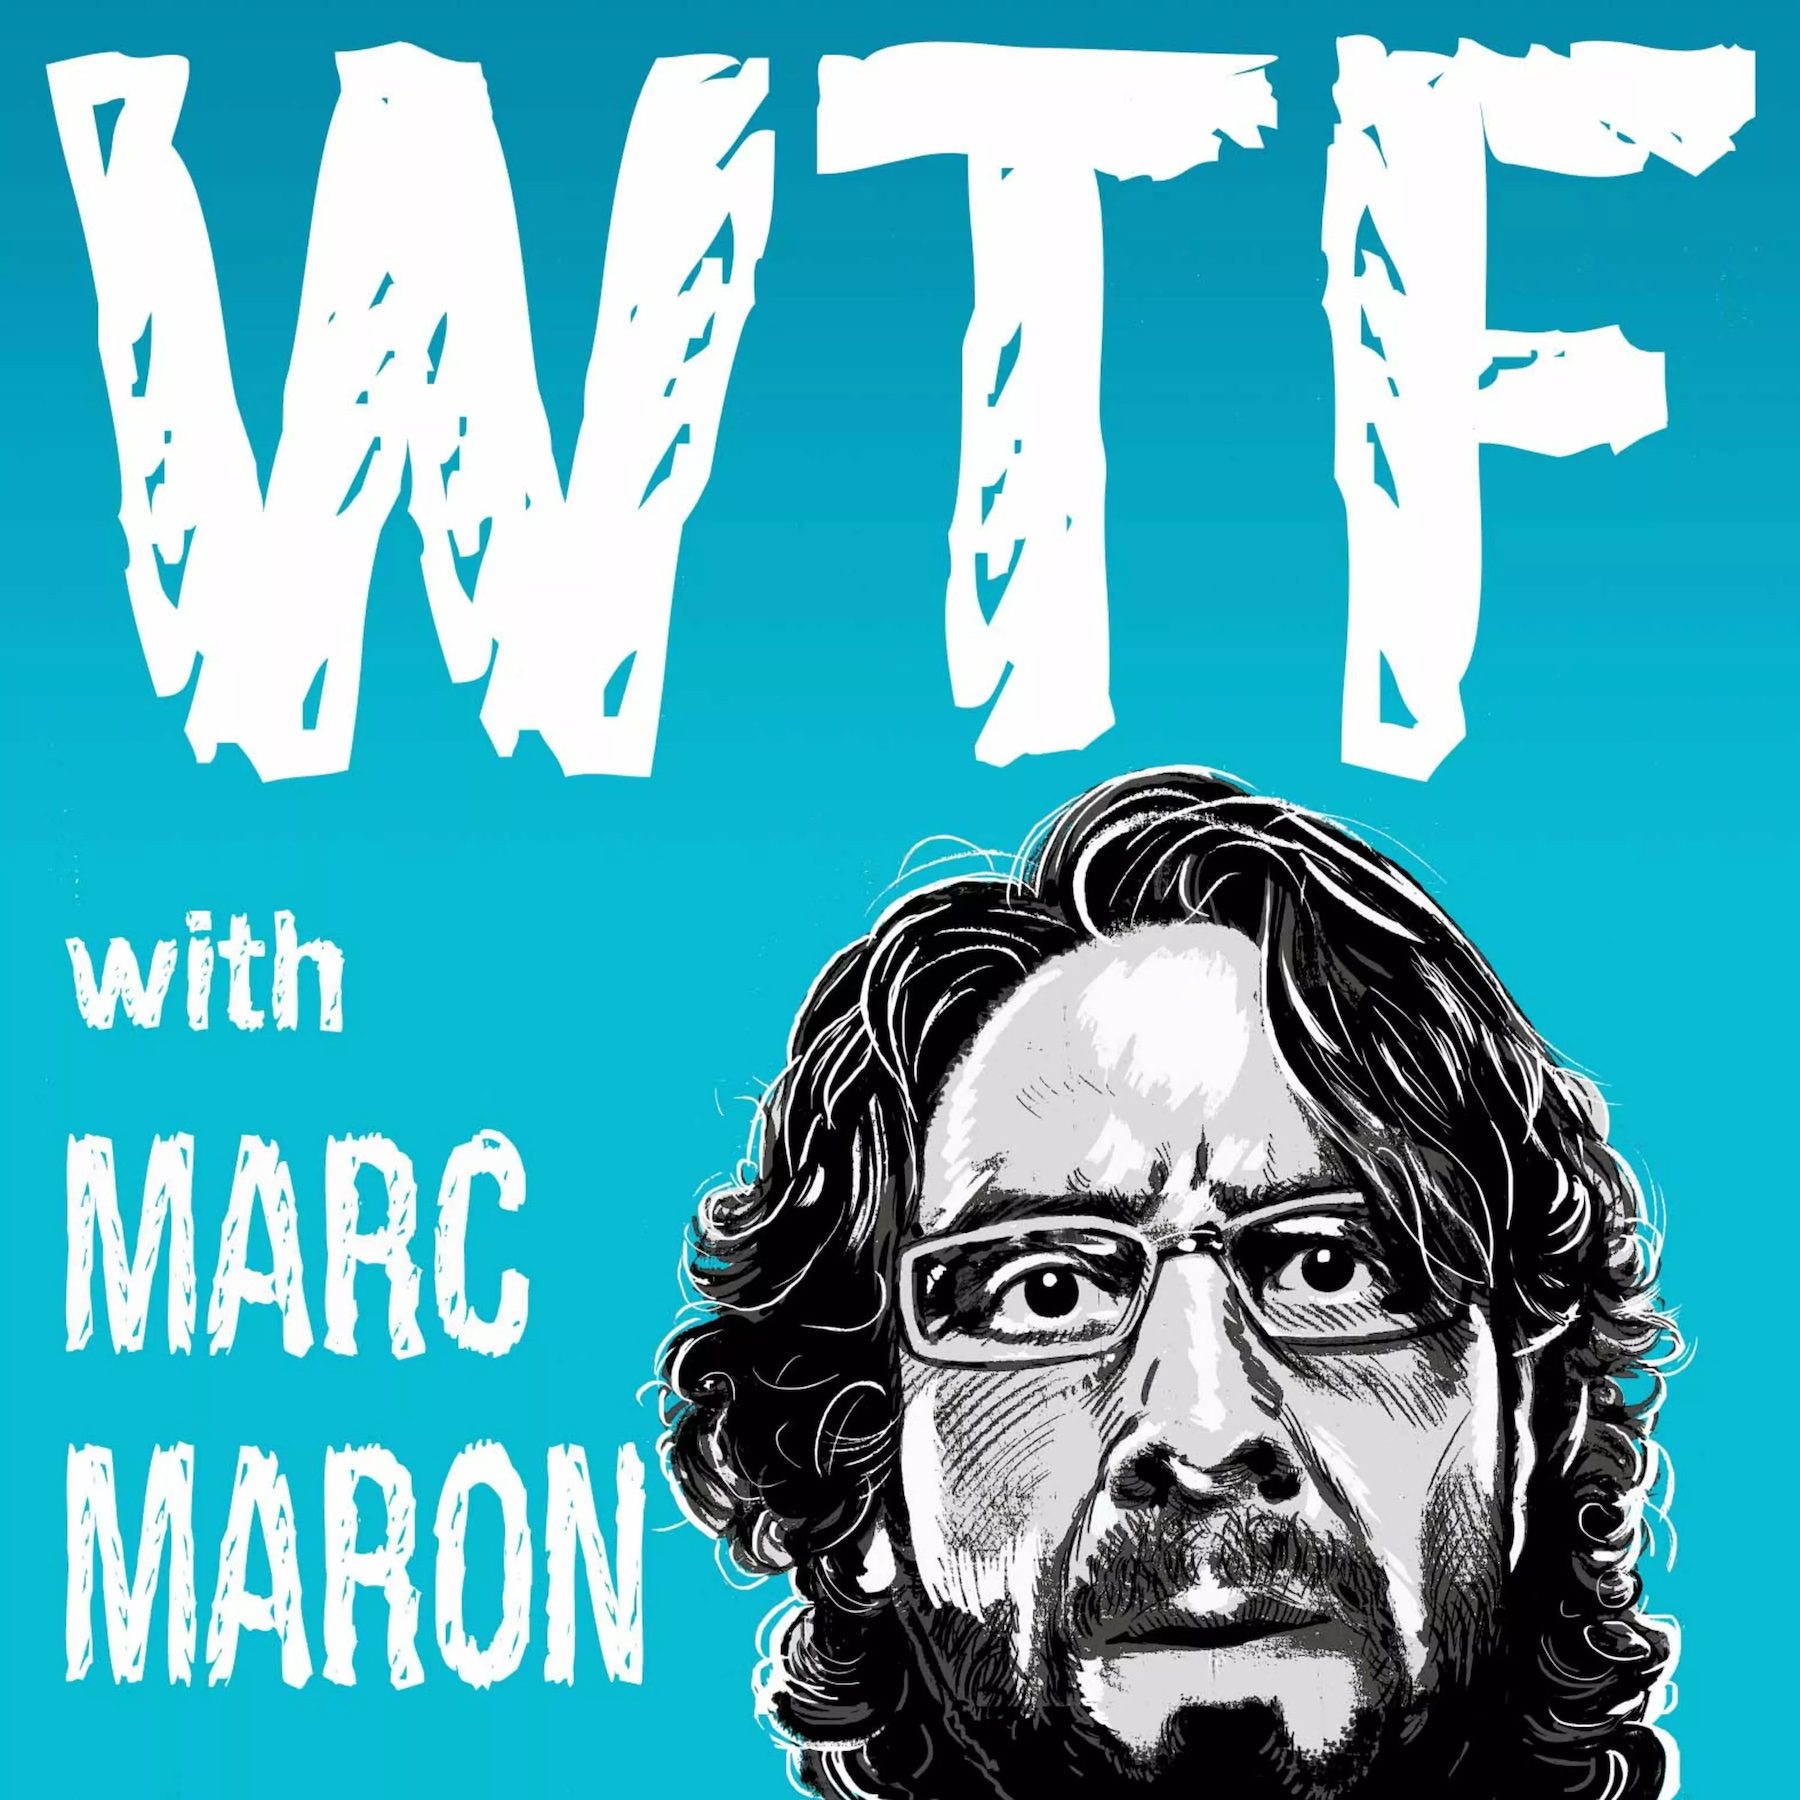 WTF with Marc Maron podcast cover artwork with a black and white stylized image of Maron against sky blue background with white text.